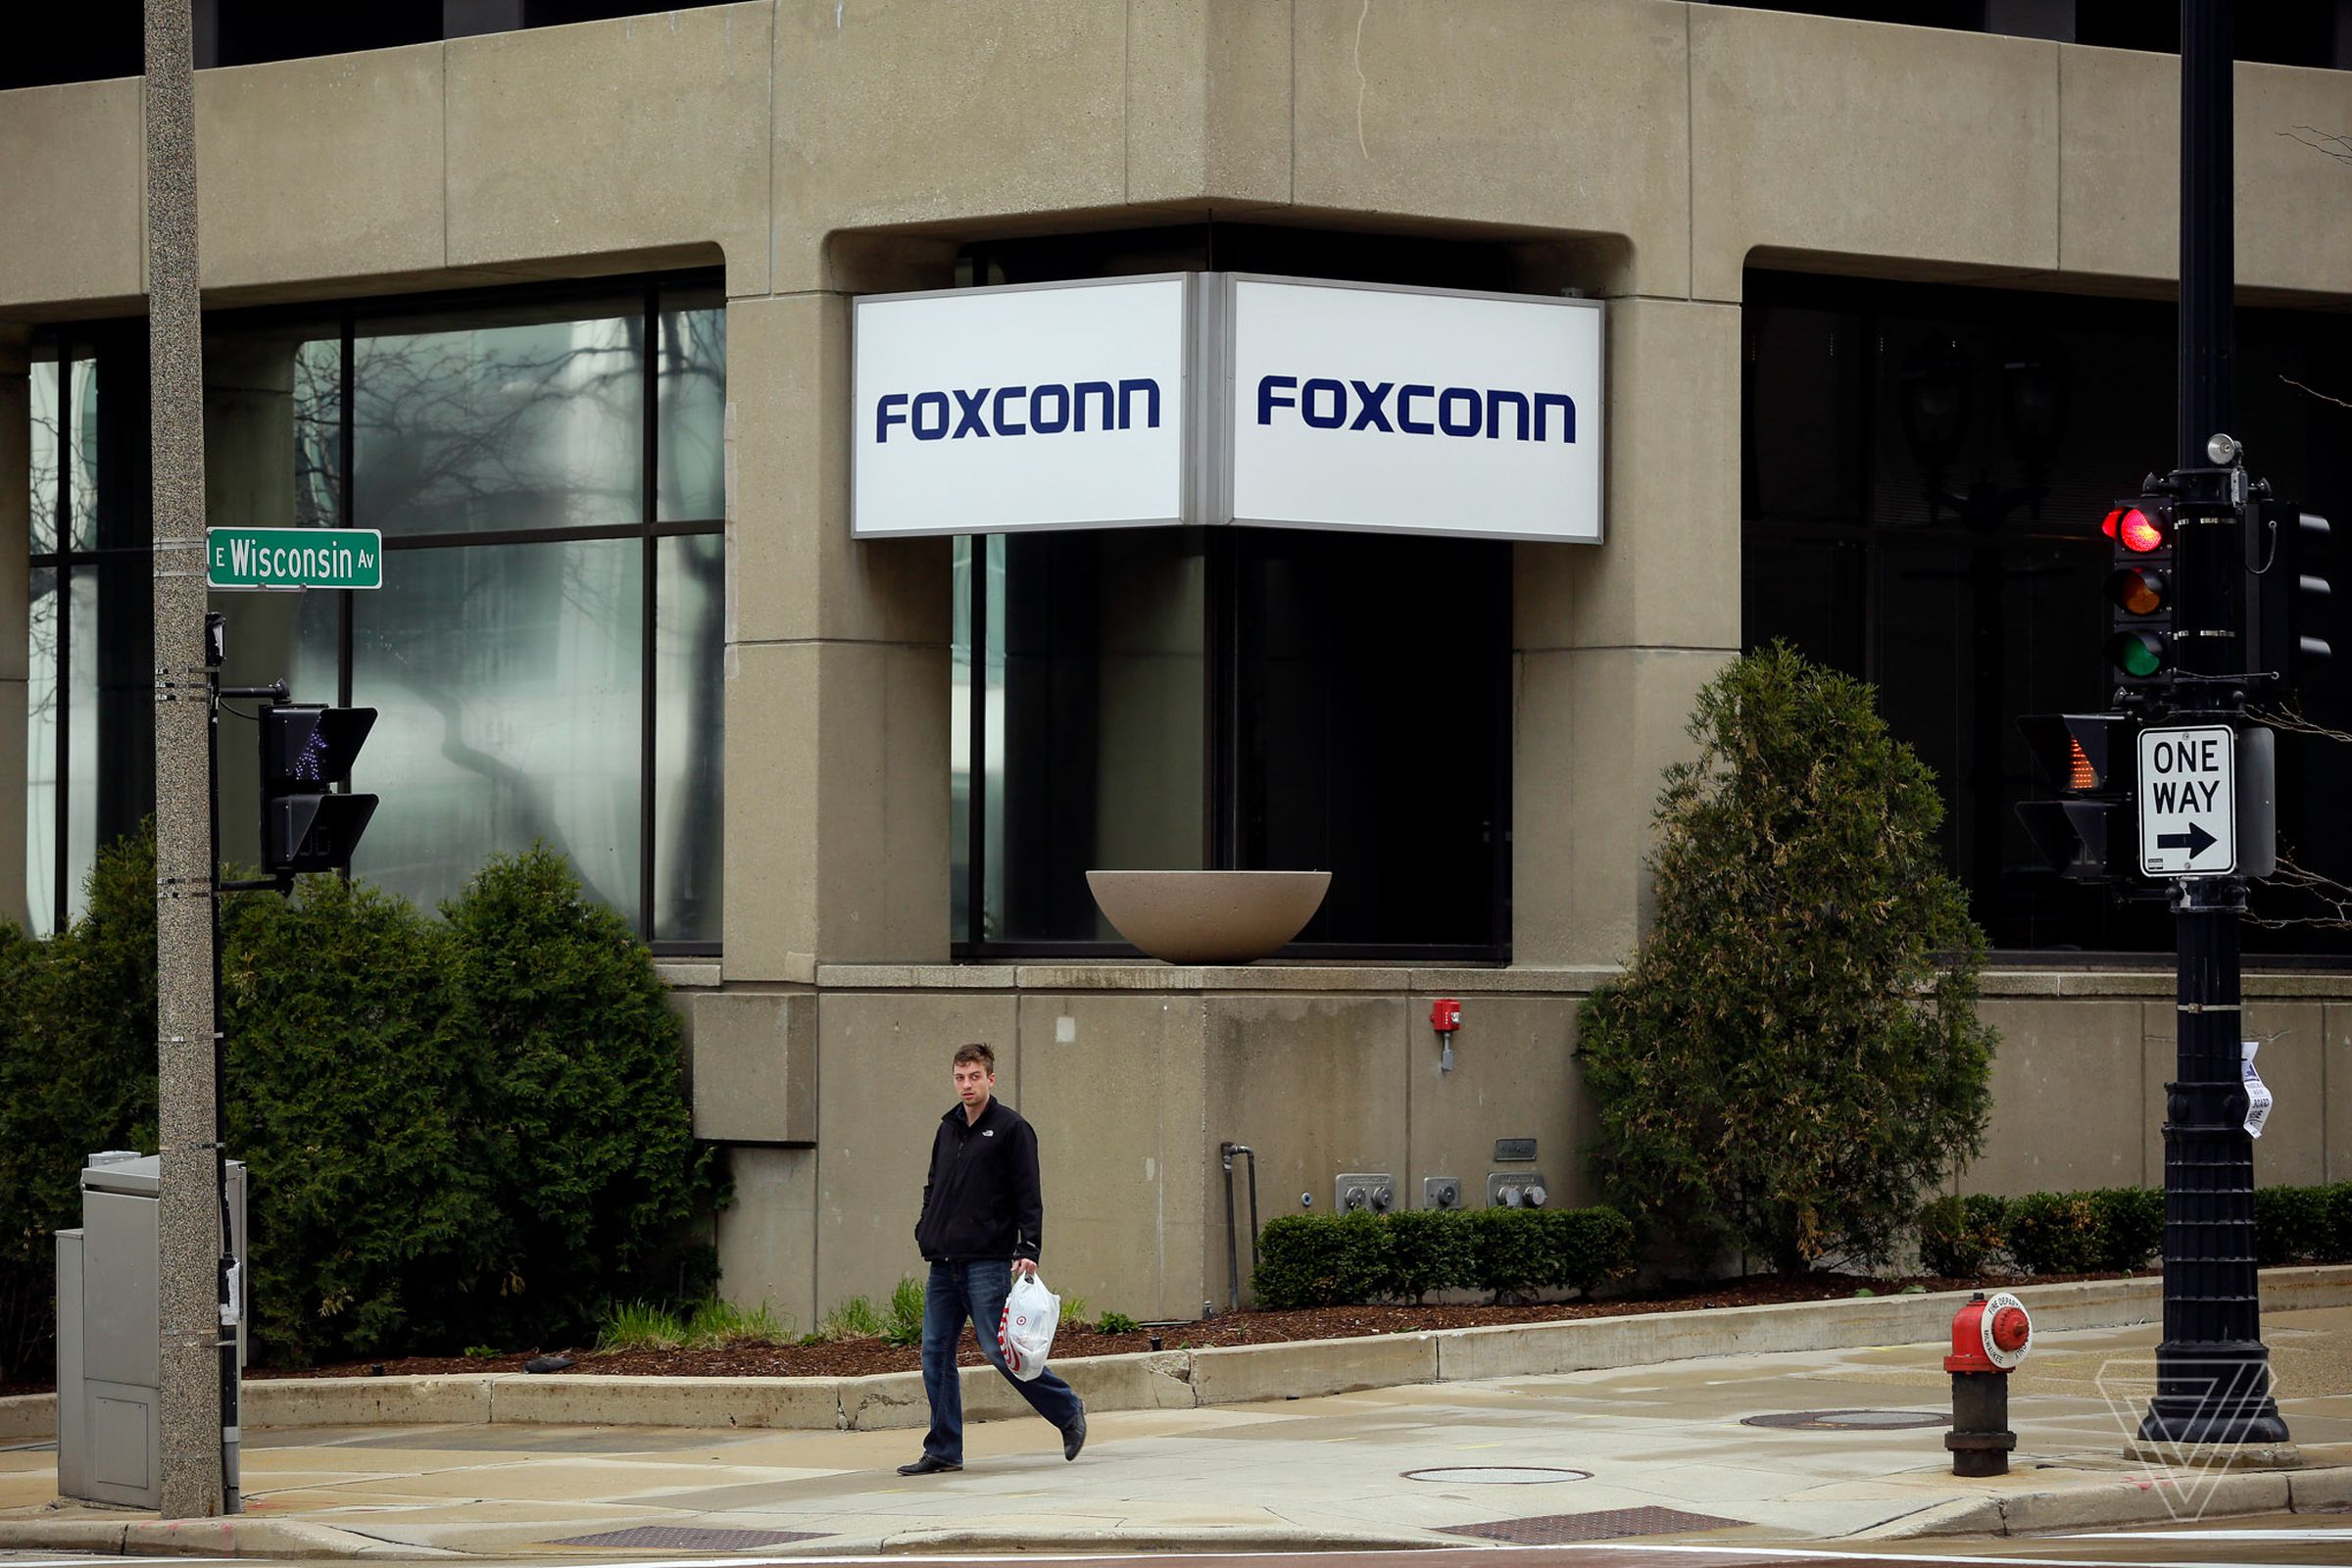 A man walks past an office building with the Foxconn name displayed outside on Wednesday, May 8 2019 in Milwaukee, Wisconsin.